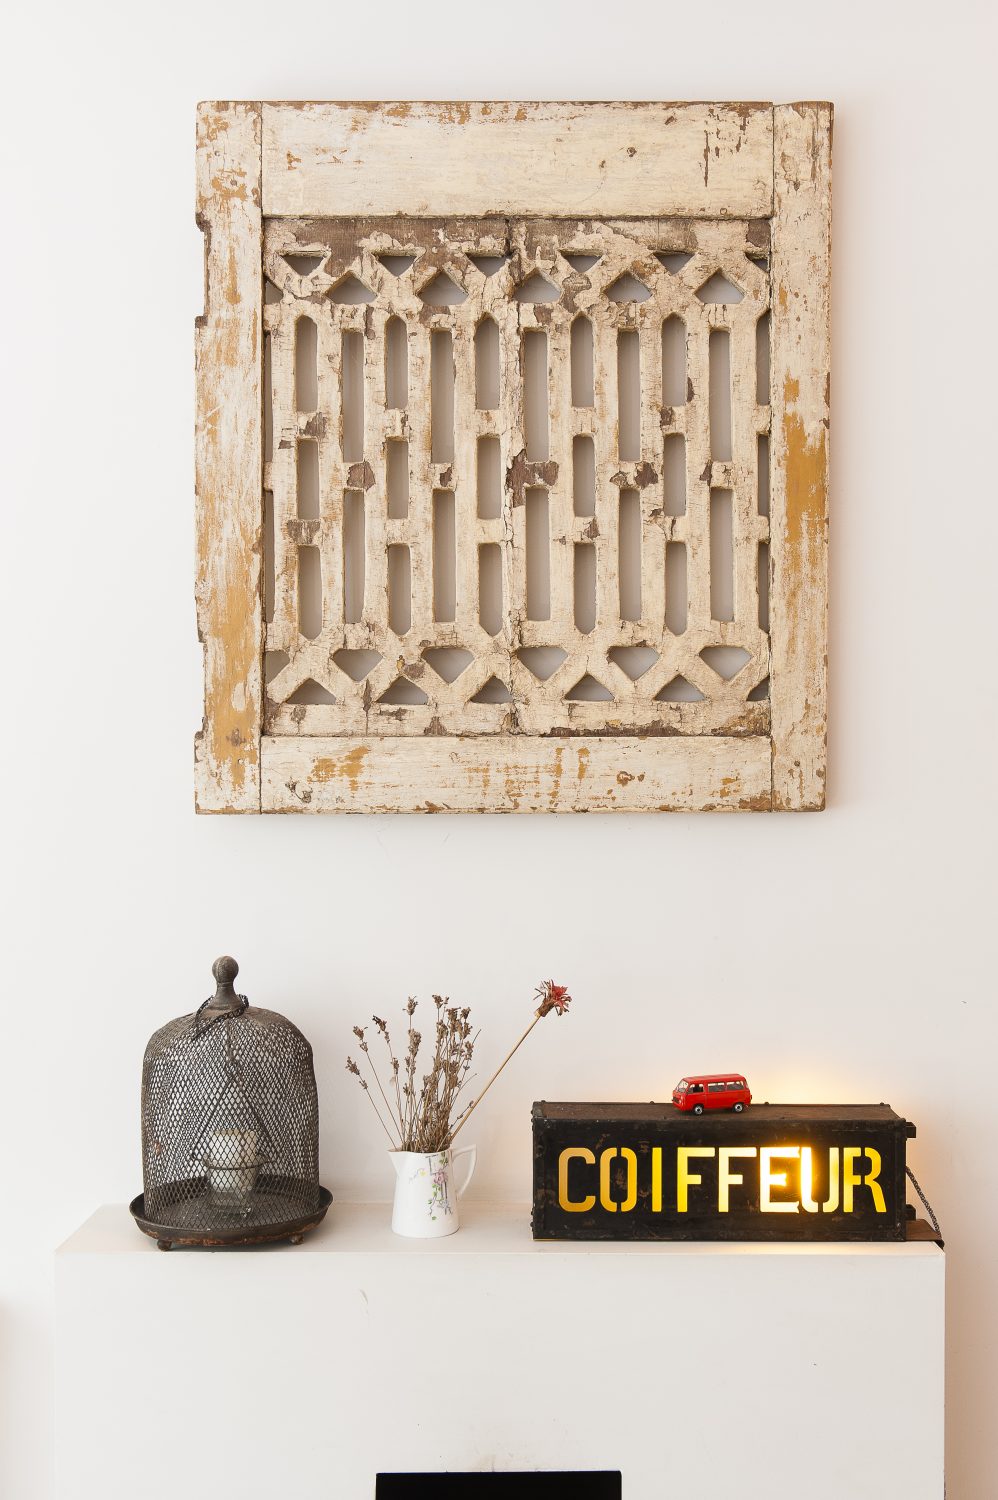 An old French chateau shutter on the living room wall is displayed like a piece of art above an illuminated coiffeur unit from a French hairdresser’s, picked up in Lille at the Braderie France, a massive flea market